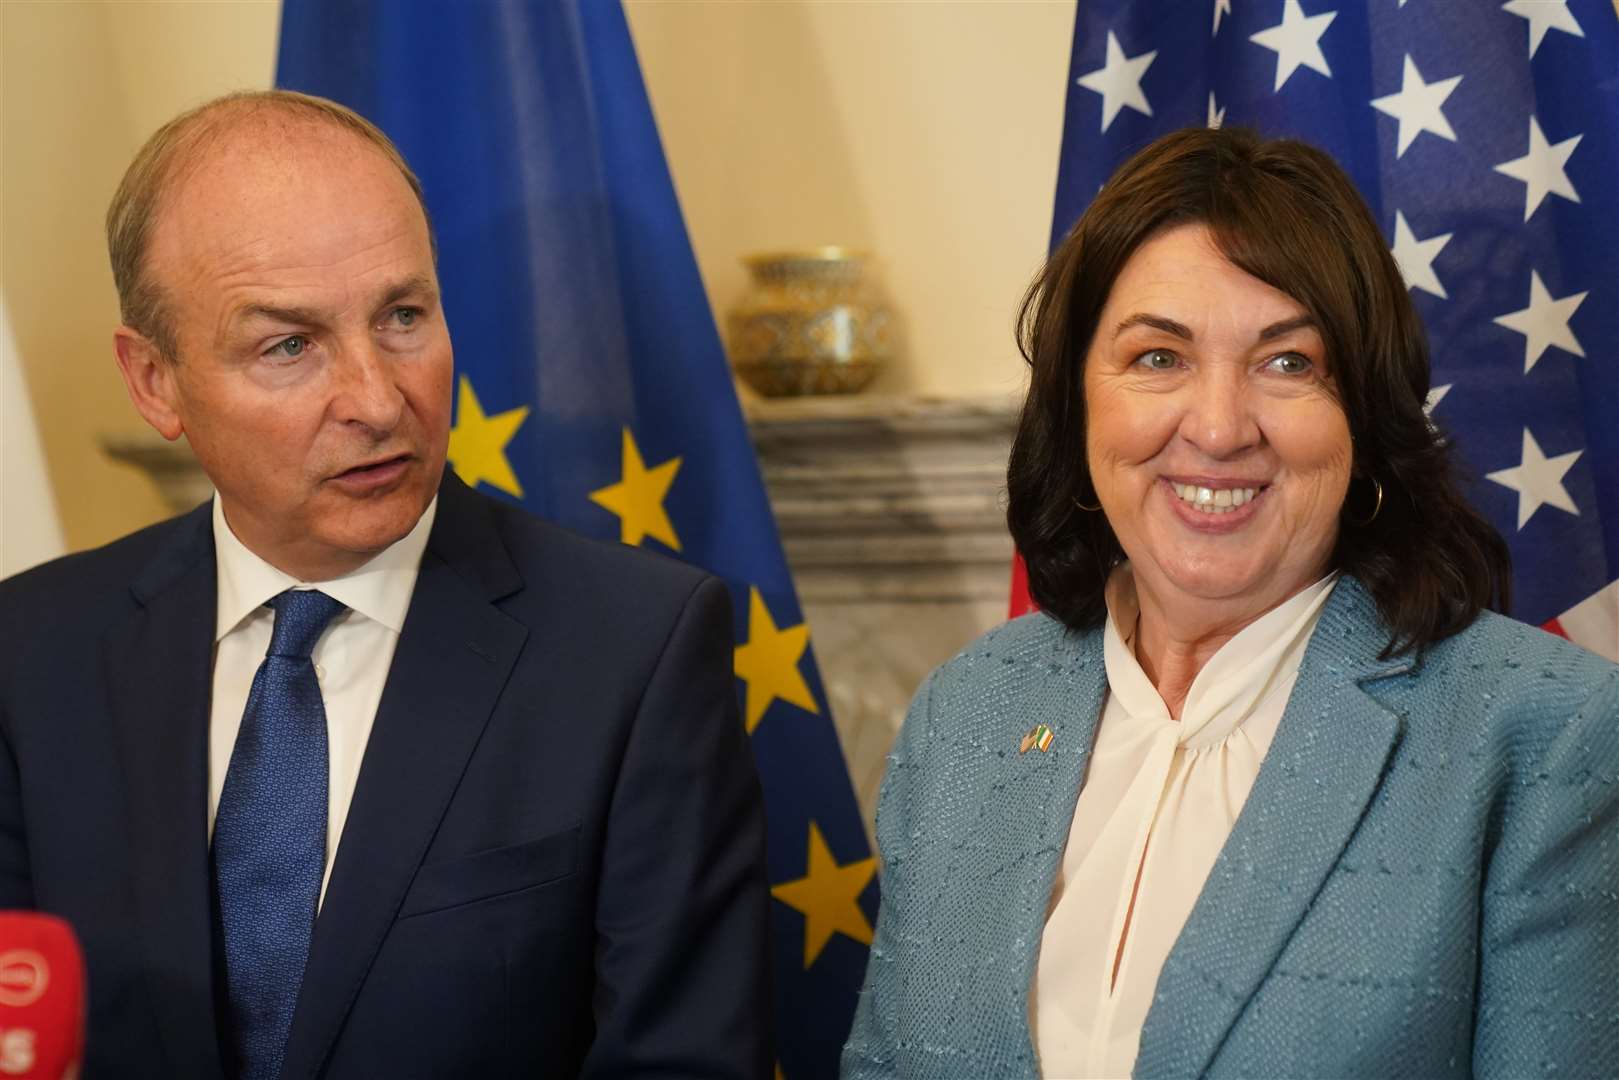 Tanaiste Micheal Martin and the US ambassador to Ireland, Claire Cronin, during a press conference at the Department of Foreign Affairs in Dublin (Brian Lawless/PA)